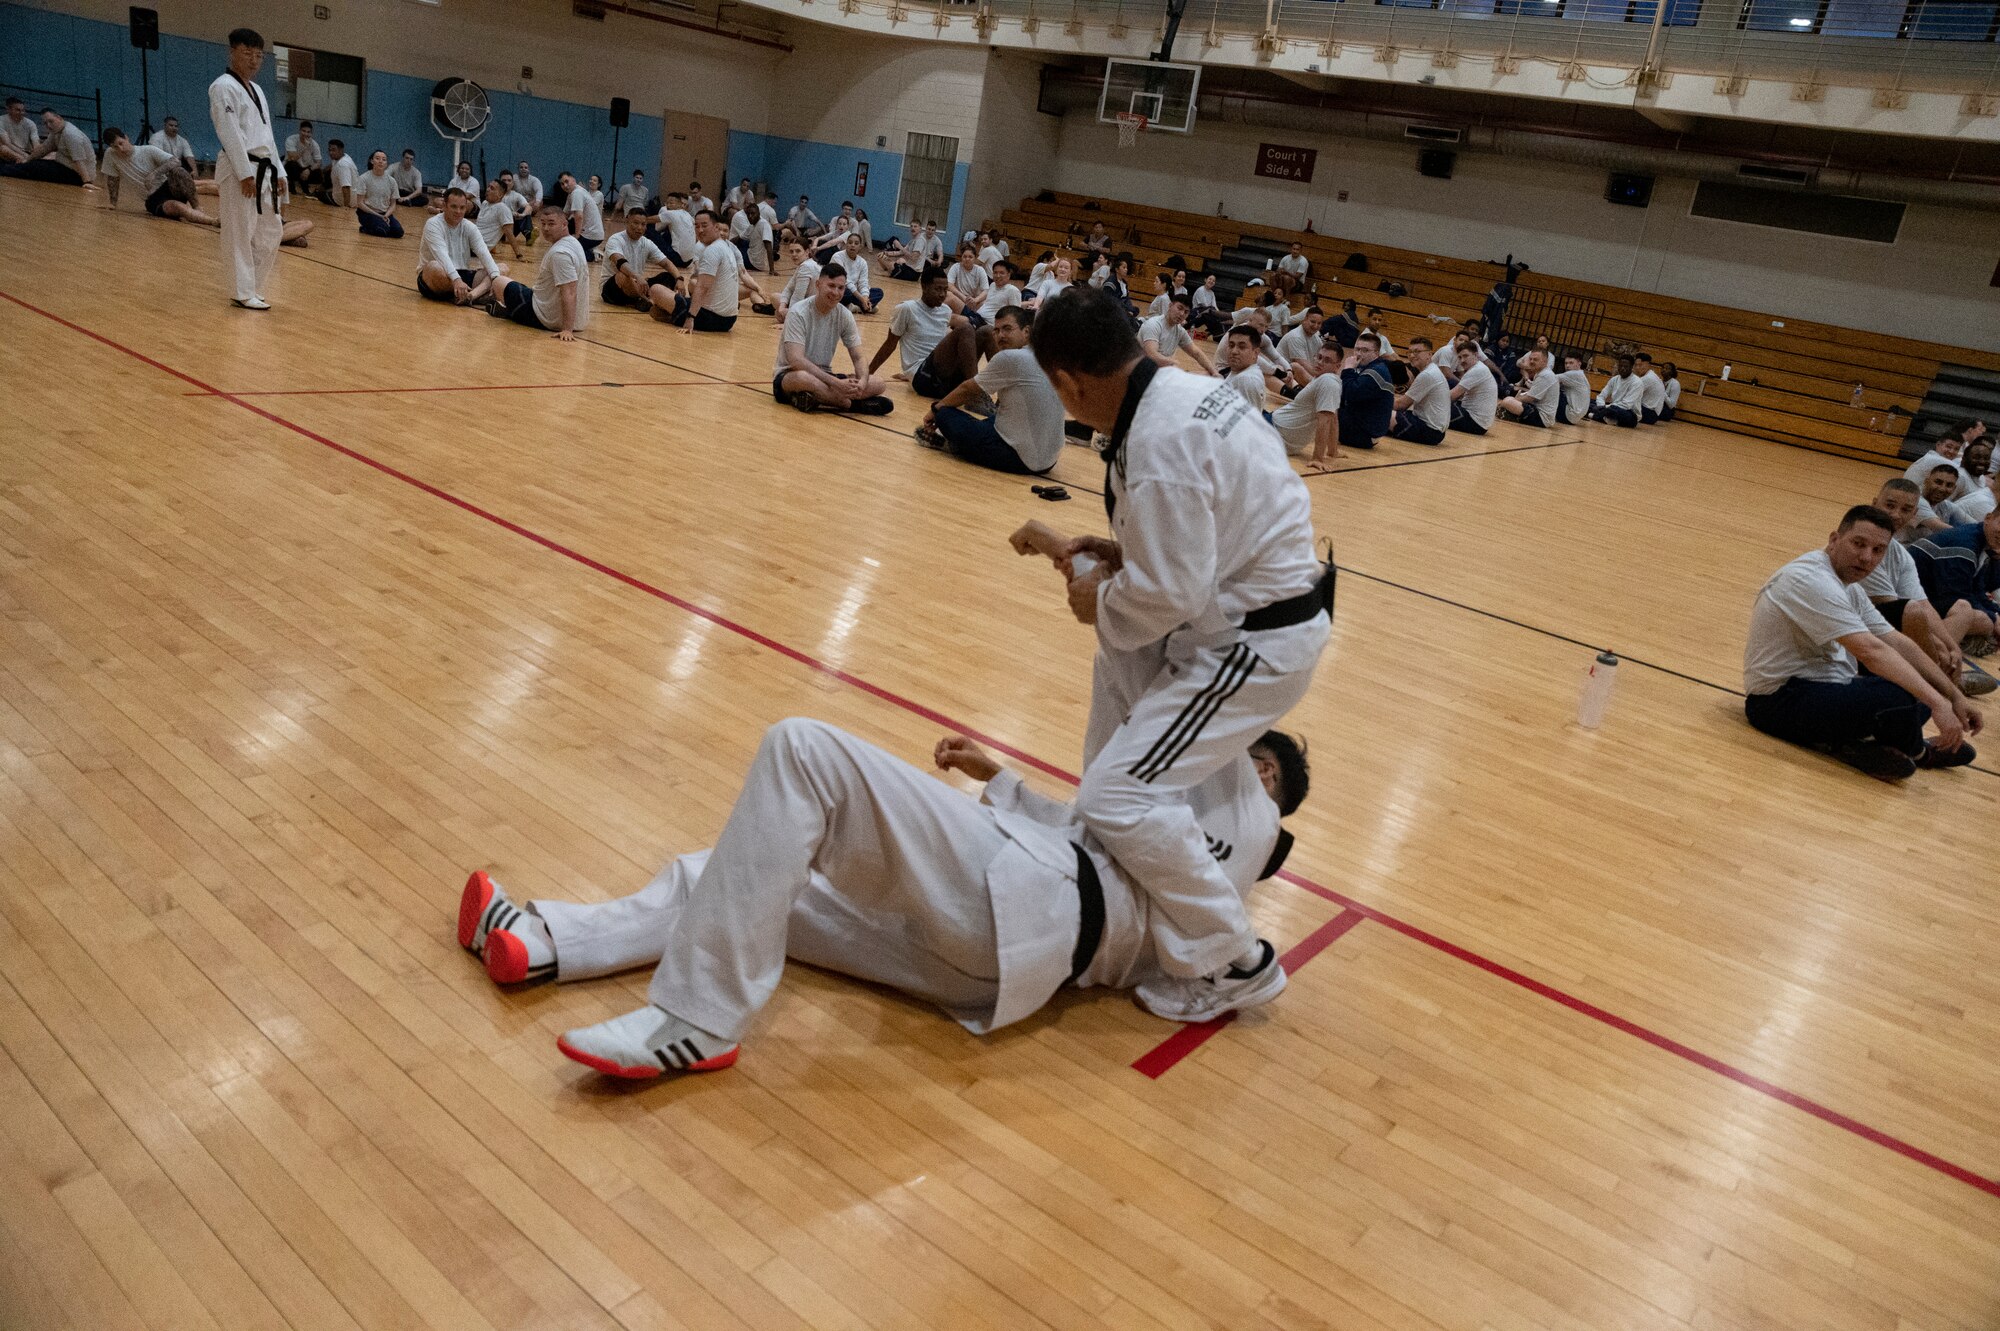 Grandmaster Munok Kim and Master Doyoung Jang, Taekwondo Promotion Foundation, demonstrate proper takedown techniques during a 51st Mission Support Group physical training session at Osan Air Base, Republic of Korea, June 30, 2022.